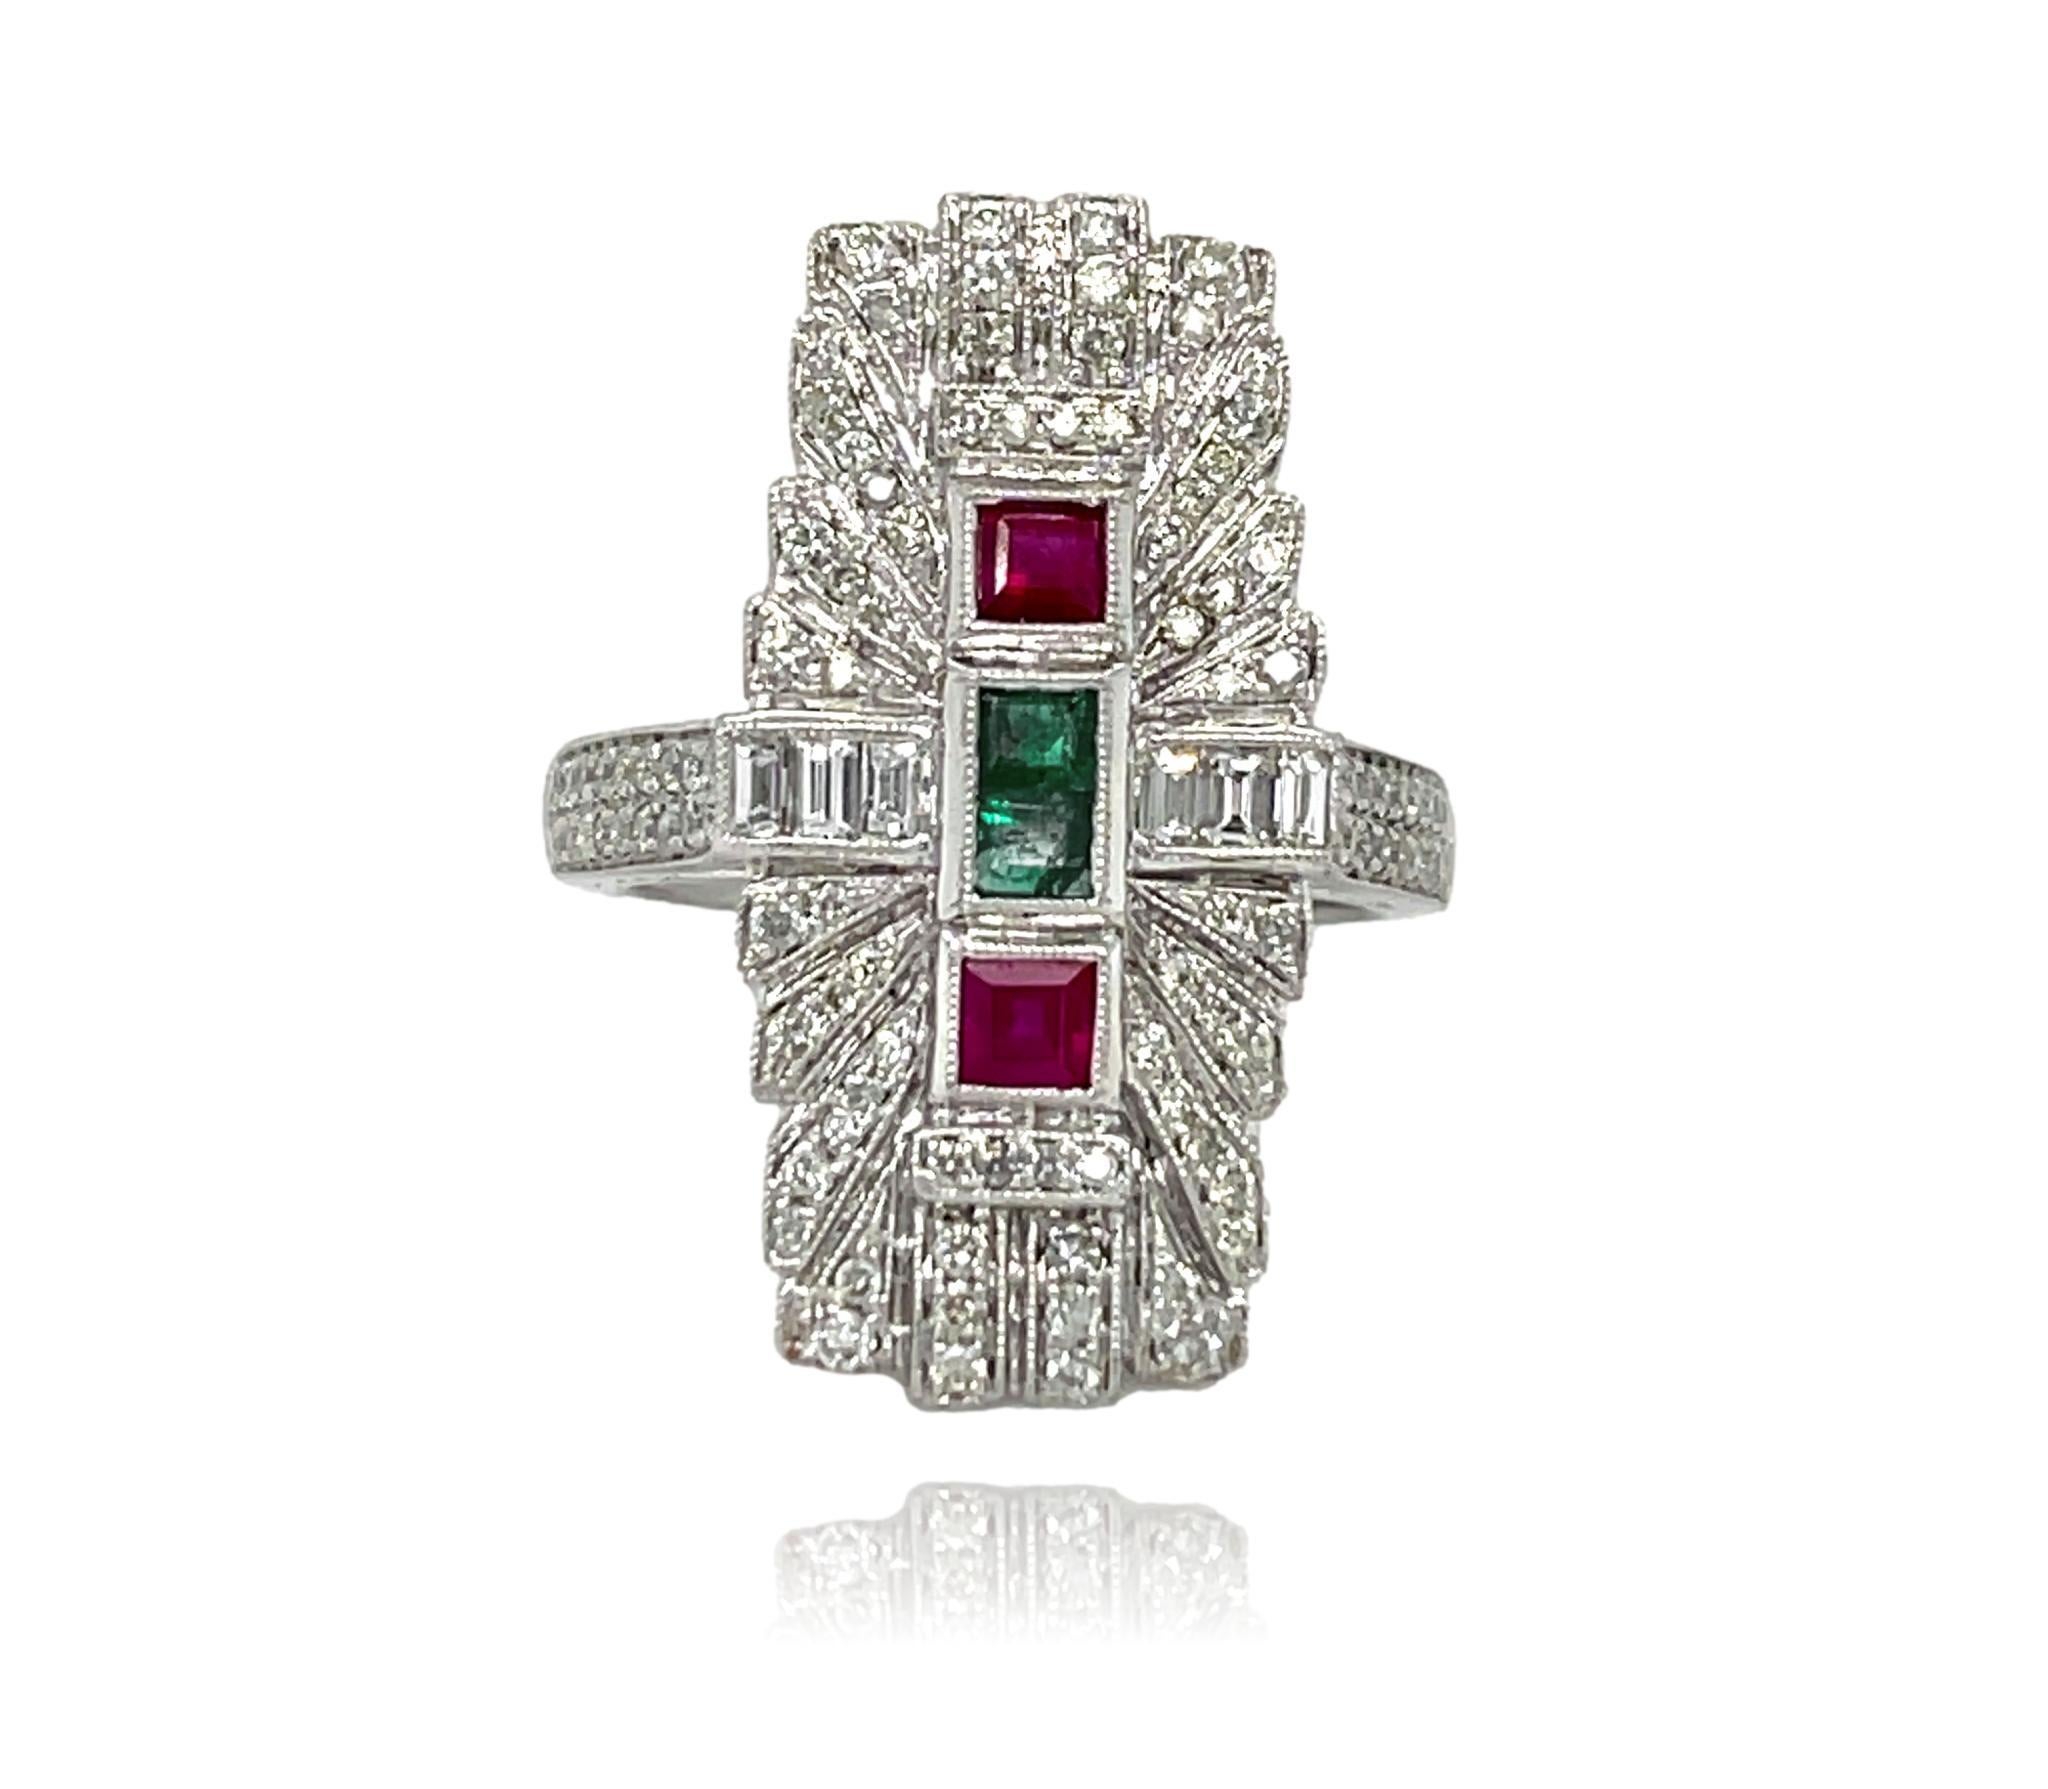 Baguette Cut Antique Emerald, Ruby and Diamond Ring in 14k White Gold For Sale